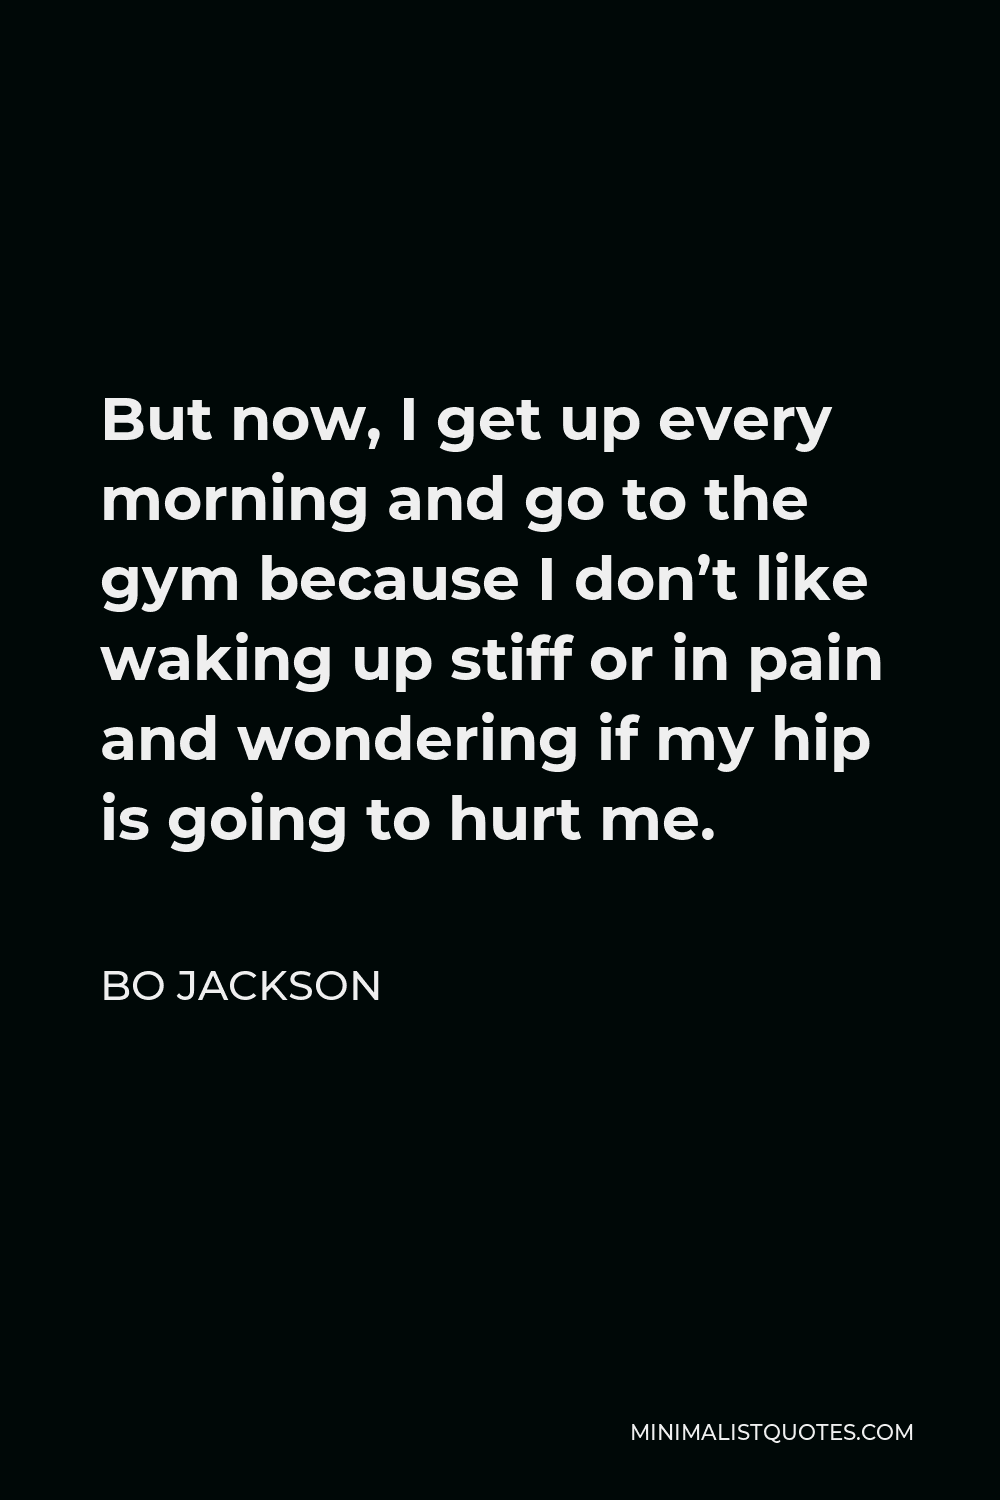 Bo Jackson Quote - But now, I get up every morning and go to the gym because I don’t like waking up stiff or in pain and wondering if my hip is going to hurt me.